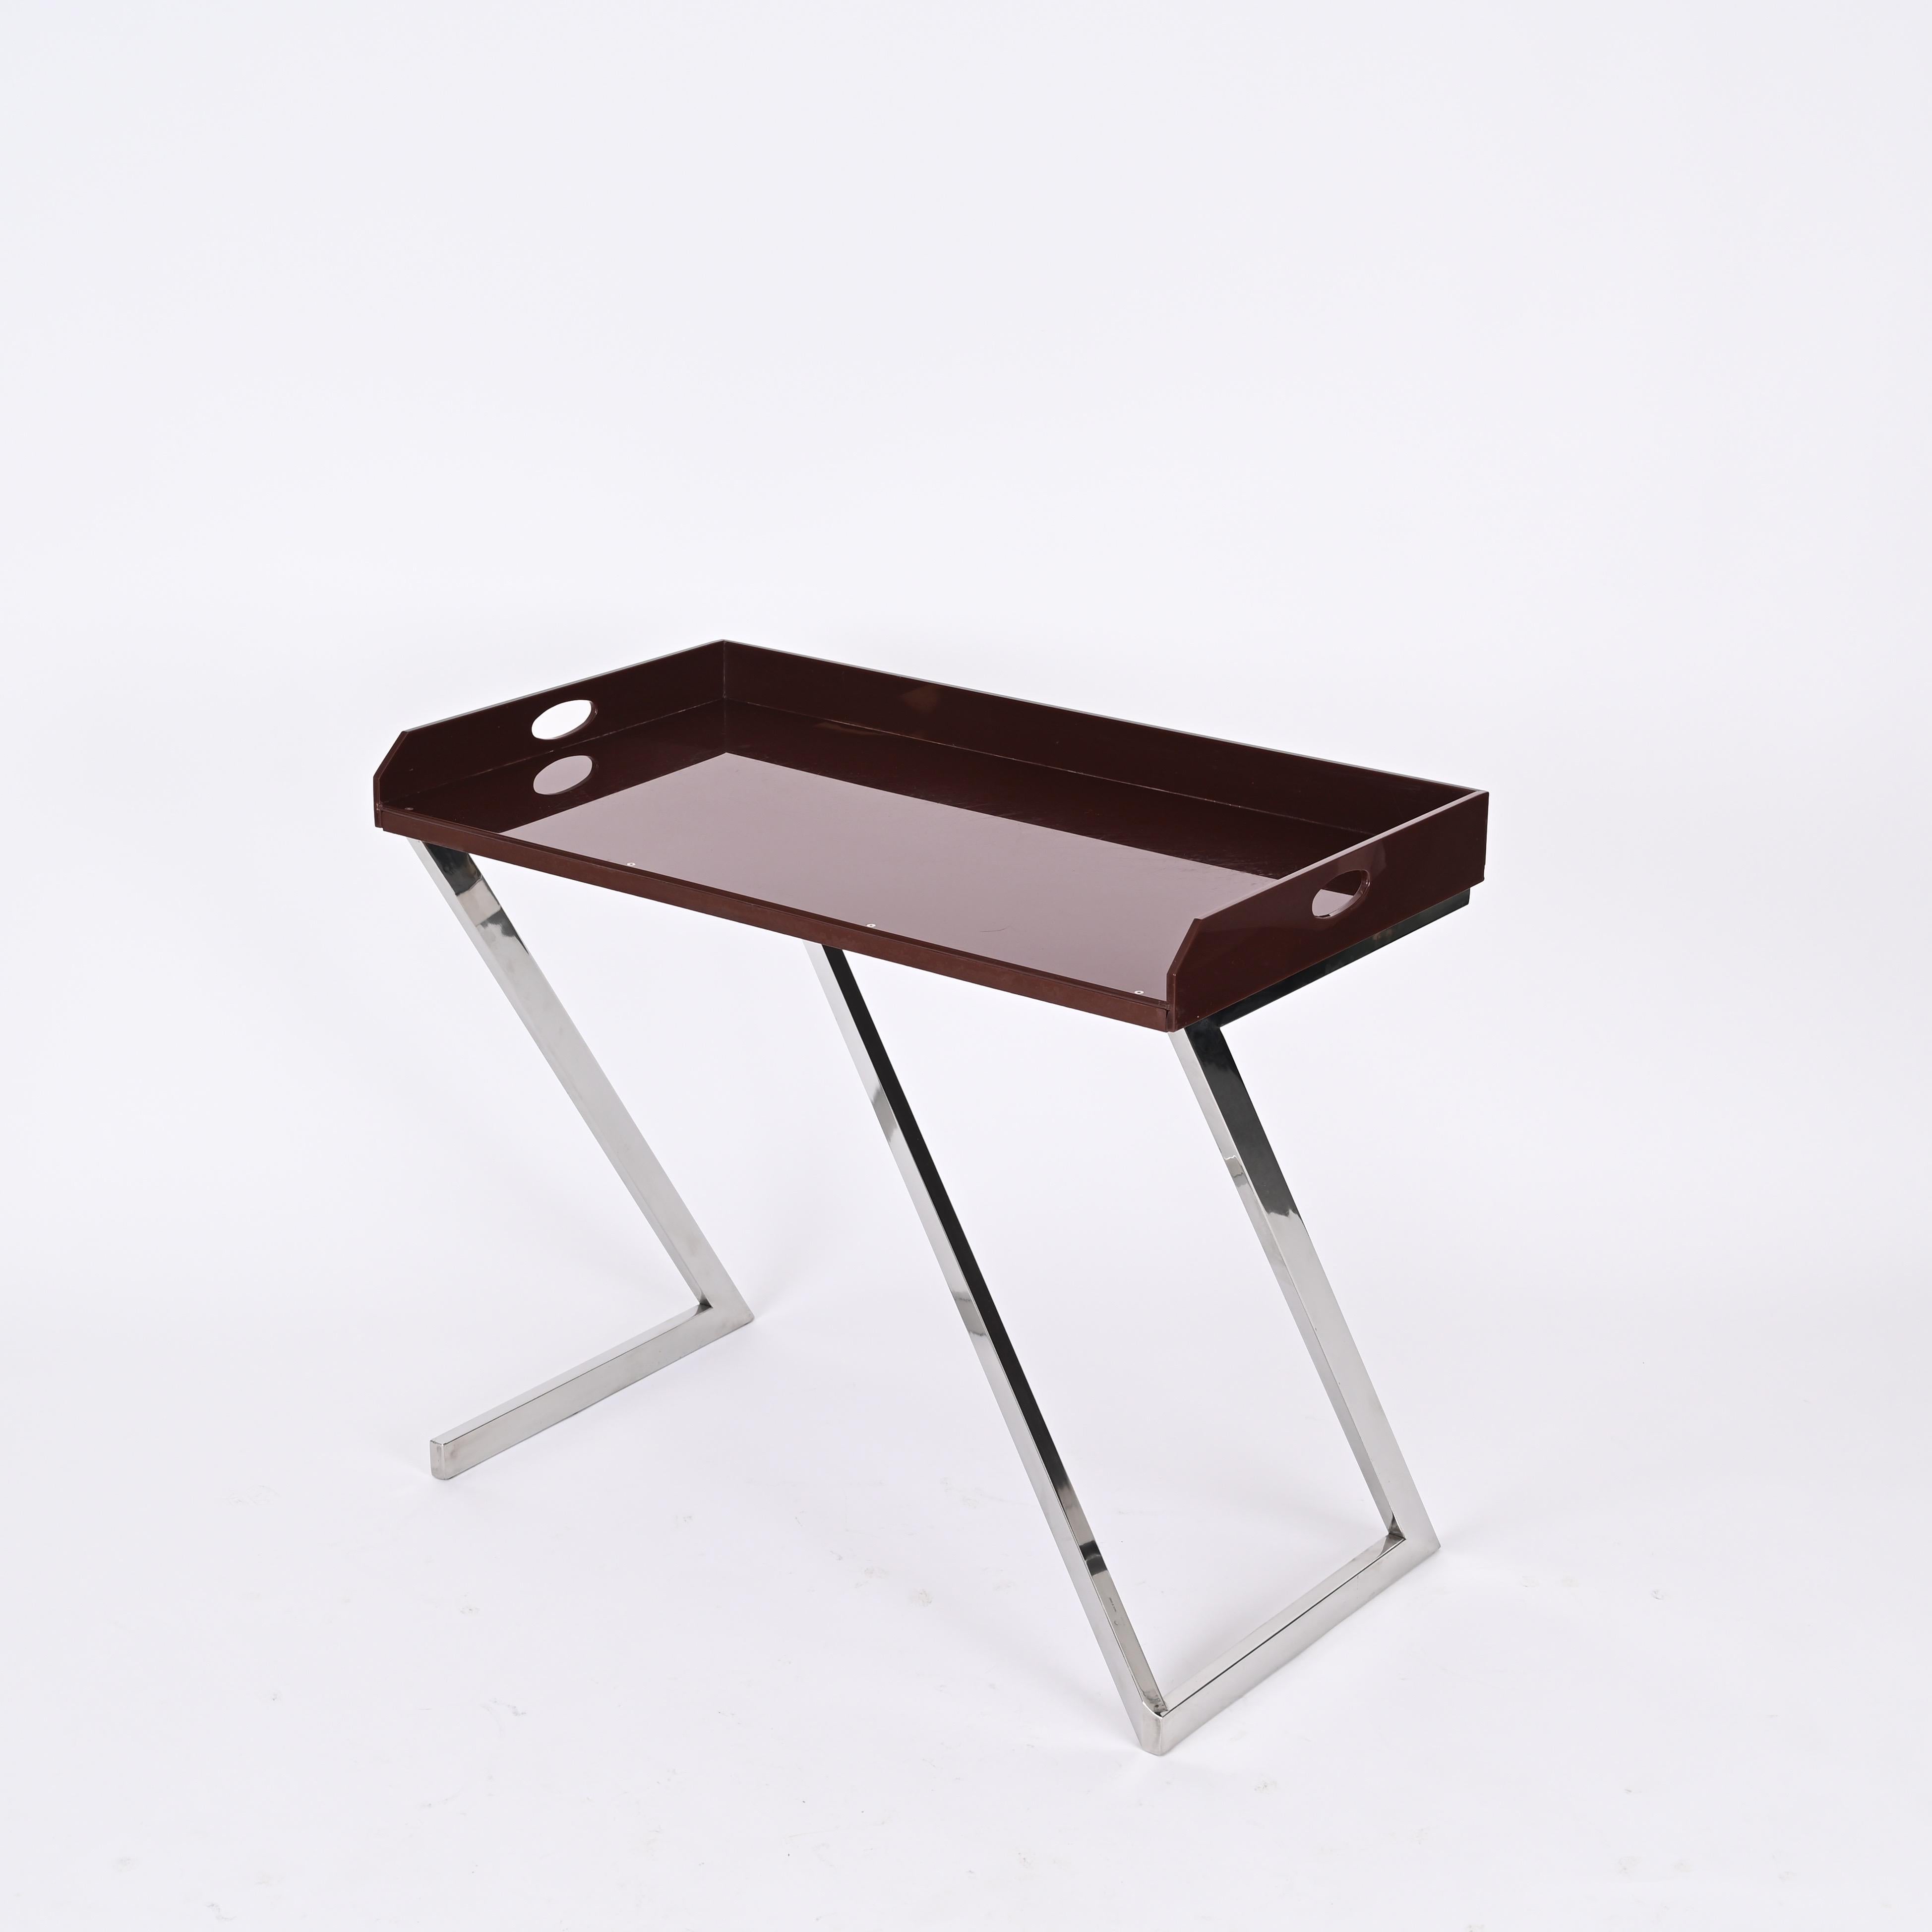 Steel Signed Romeo Rega Console or Desk in Chrome and Brown Plexiglass, Italy 1970s For Sale